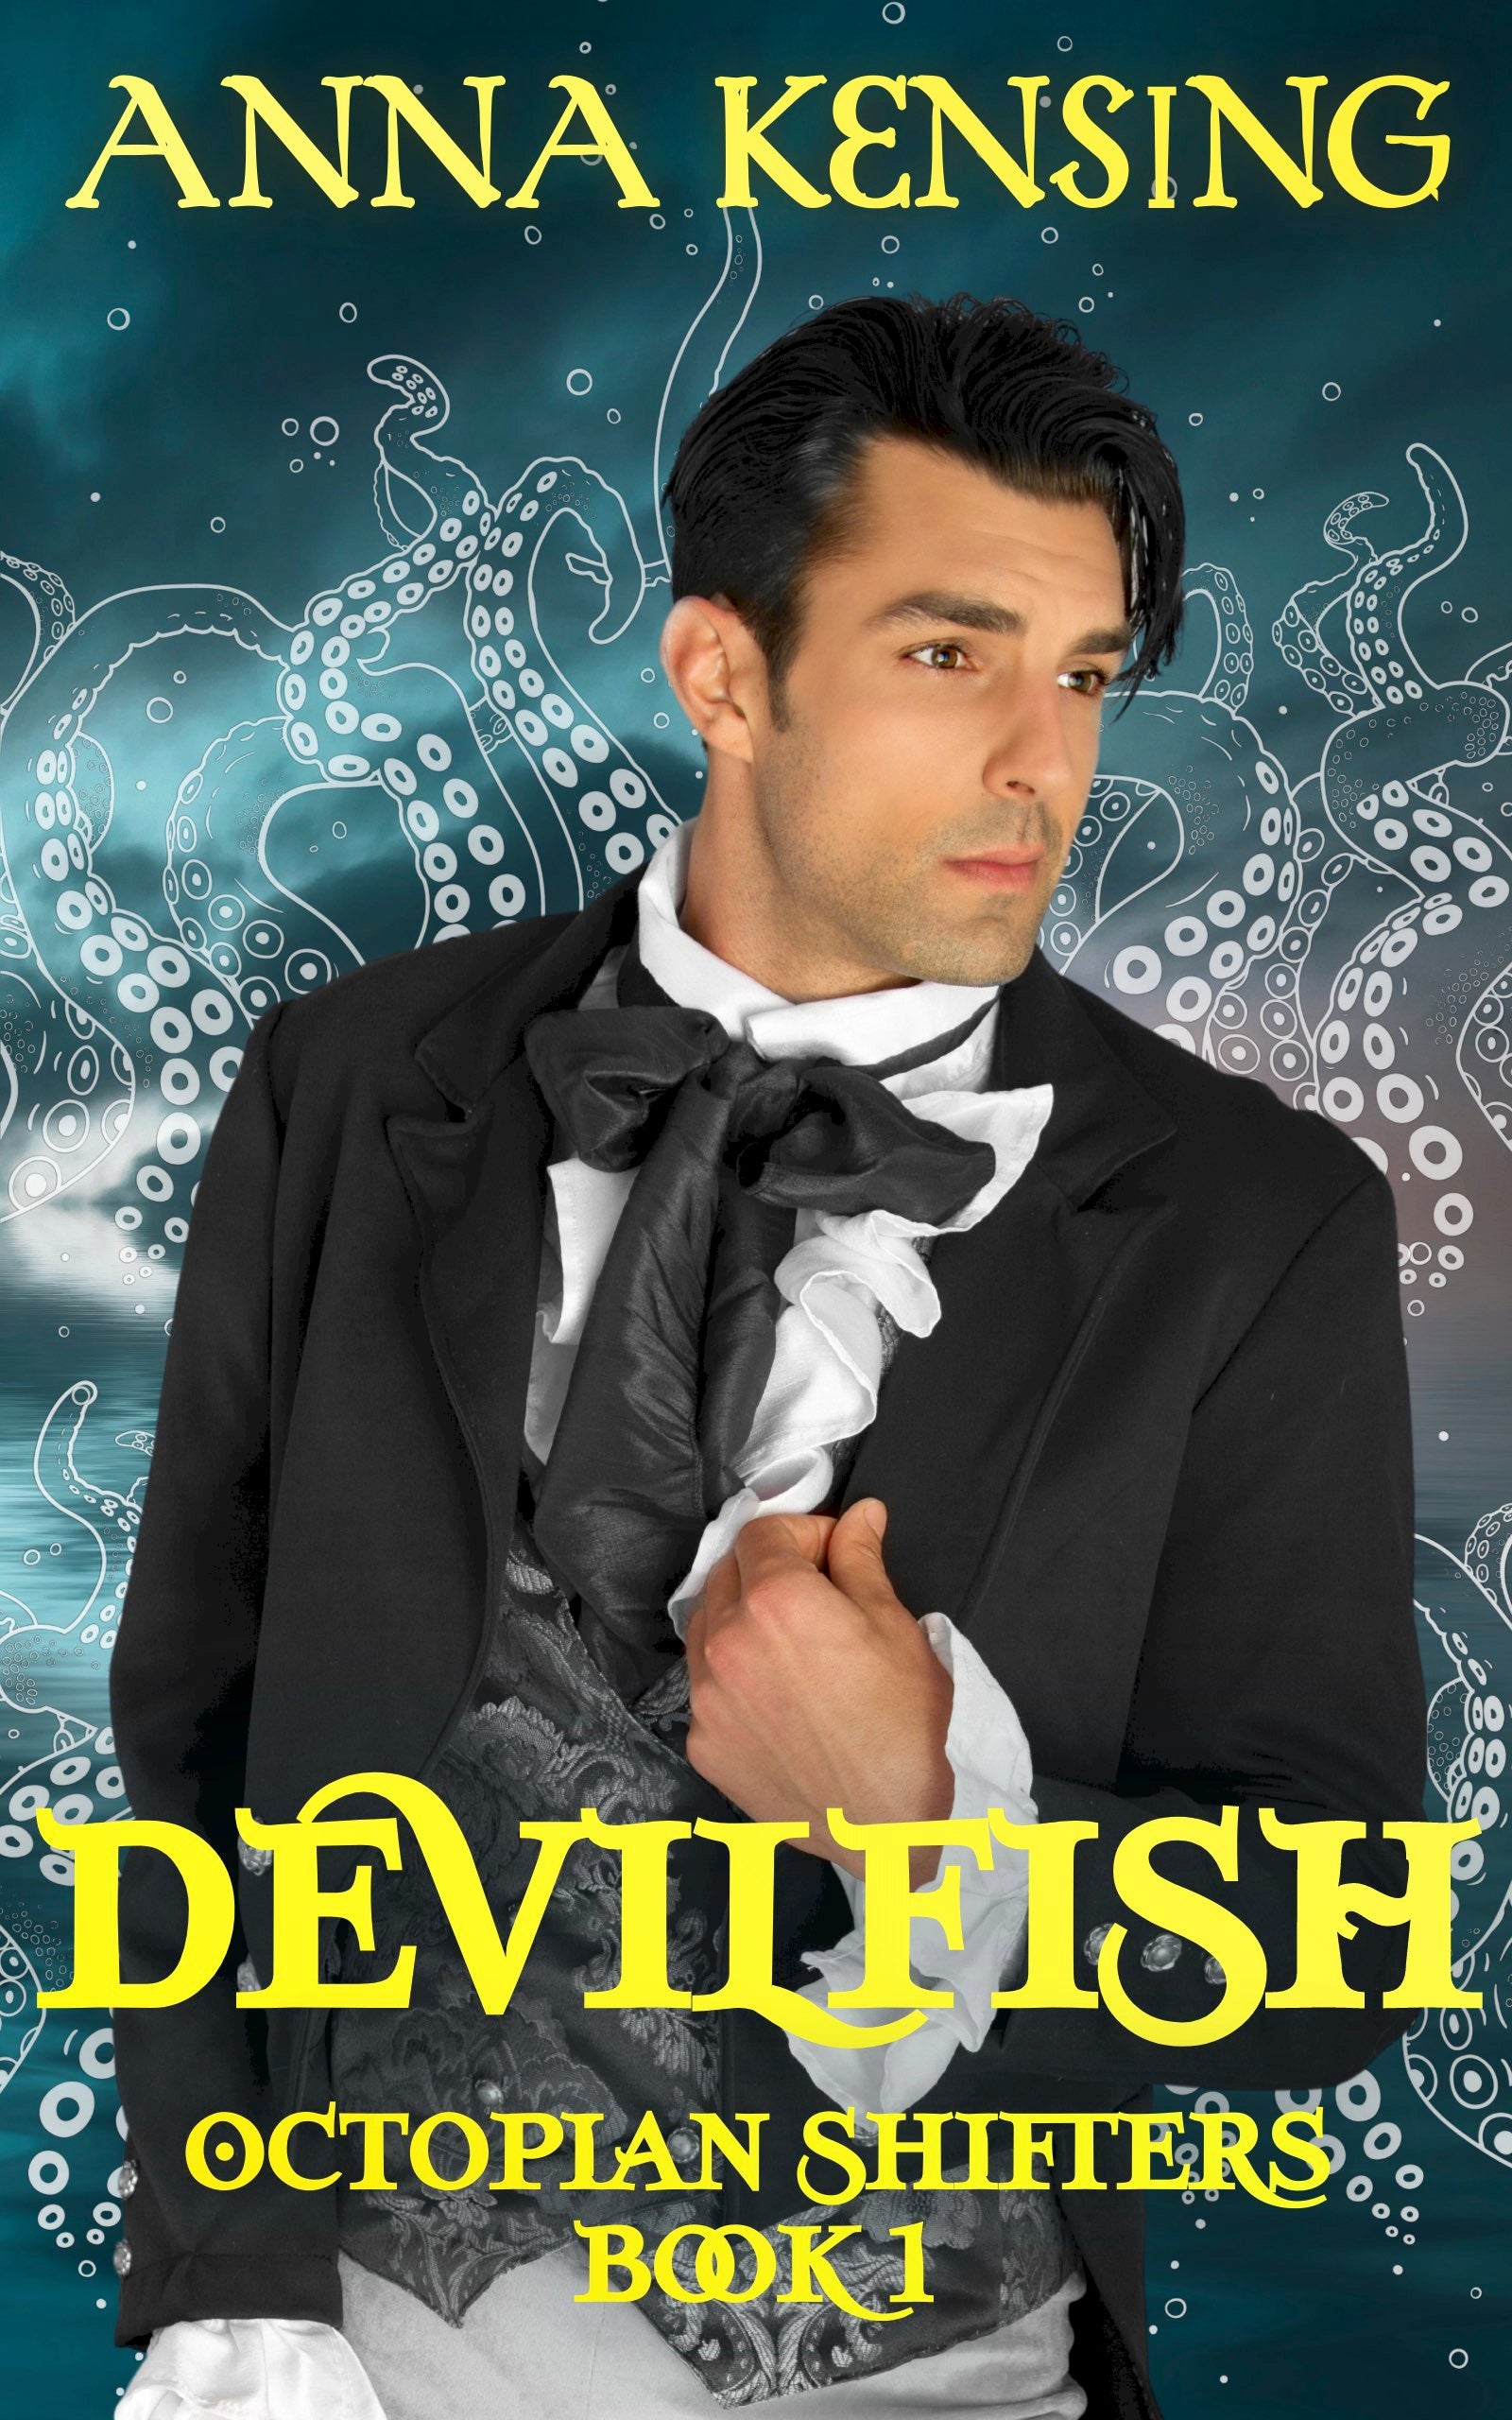 Cover of Devilfish with handsome Victorian man, book title, and author name